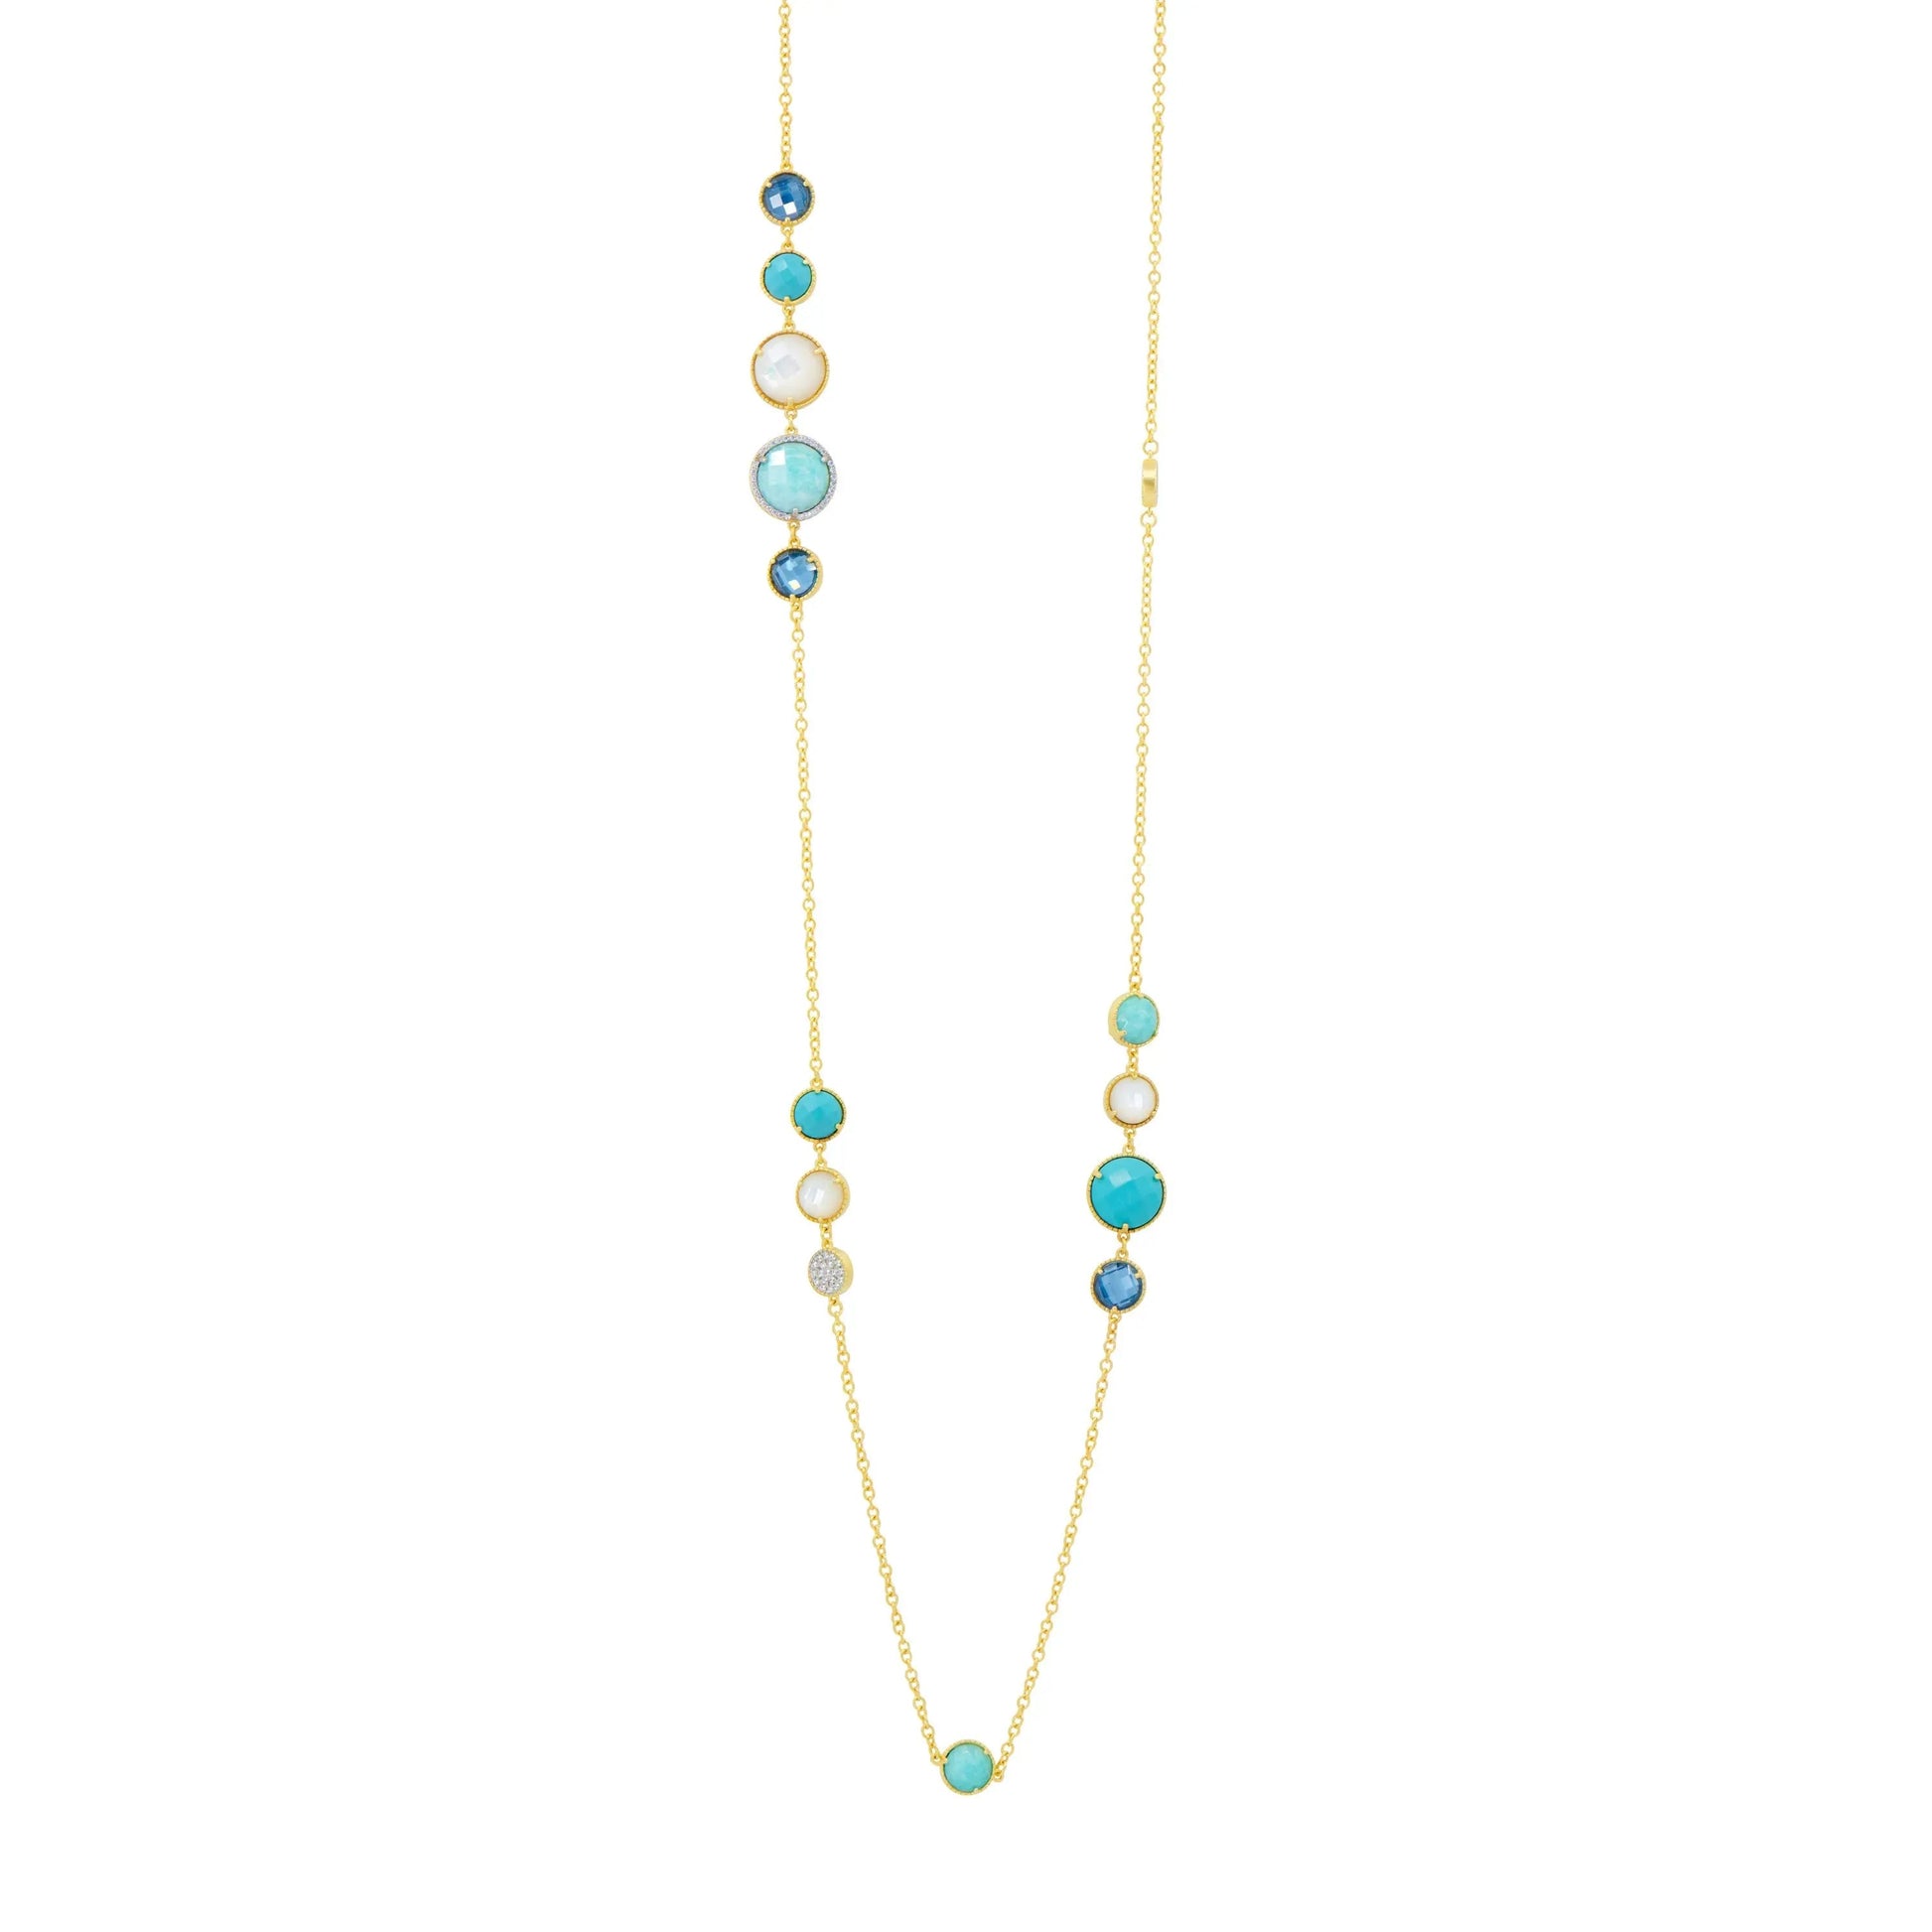  Shades of Hope Long Chain Necklace Brooklyn Coast NECKLACE